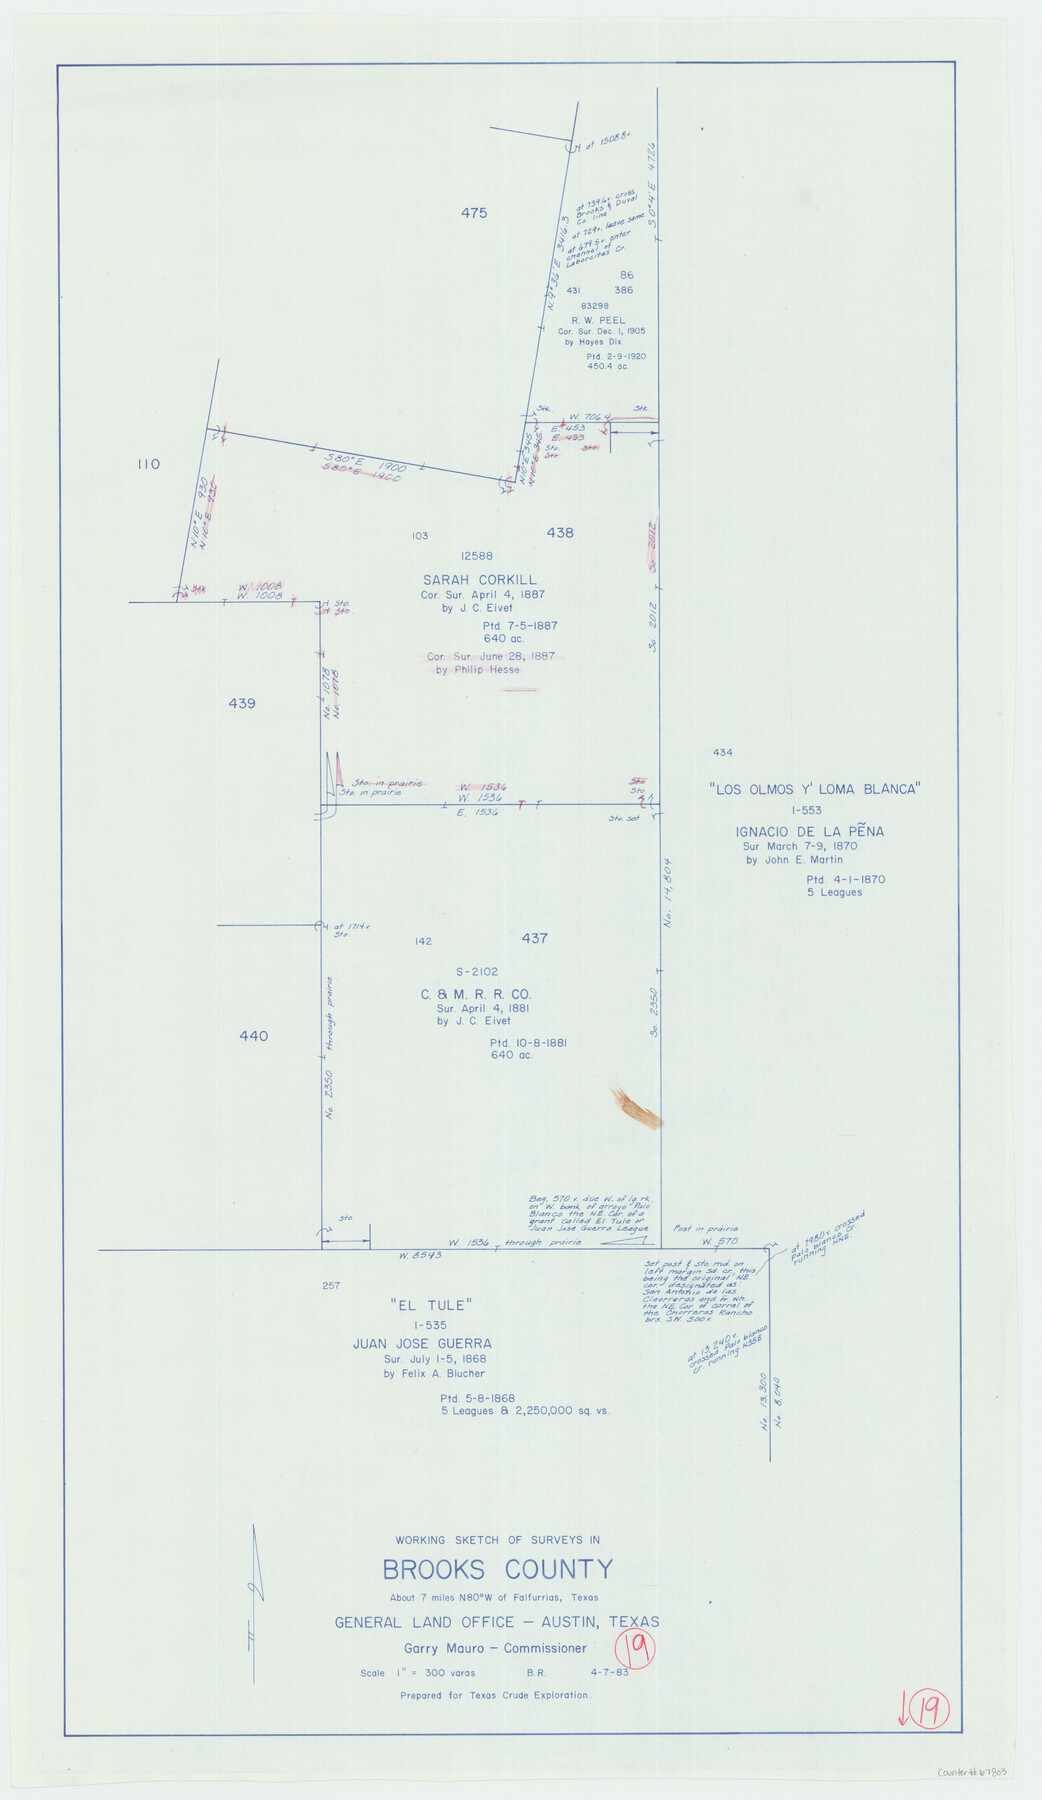 67803, Brooks County Working Sketch 19, General Map Collection